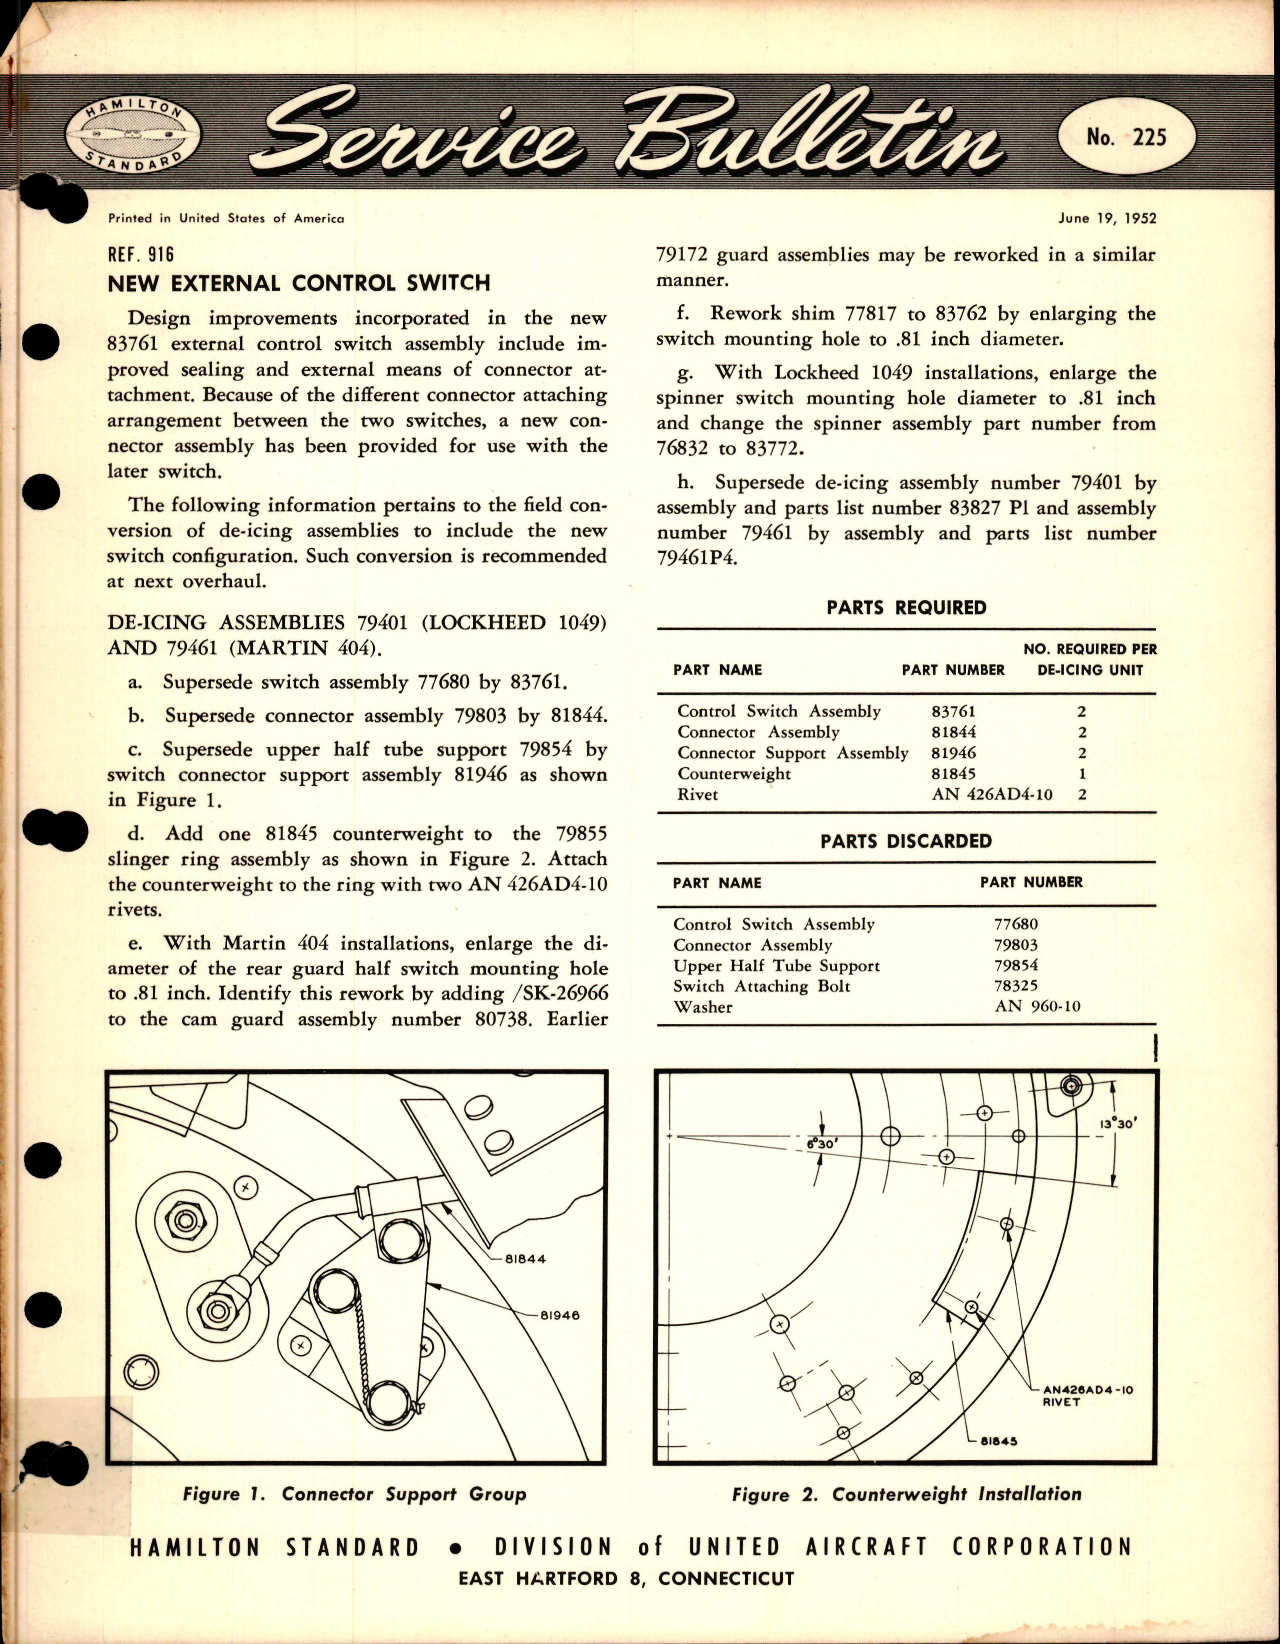 Sample page 1 from AirCorps Library document: New External Control Switch, Ref 916